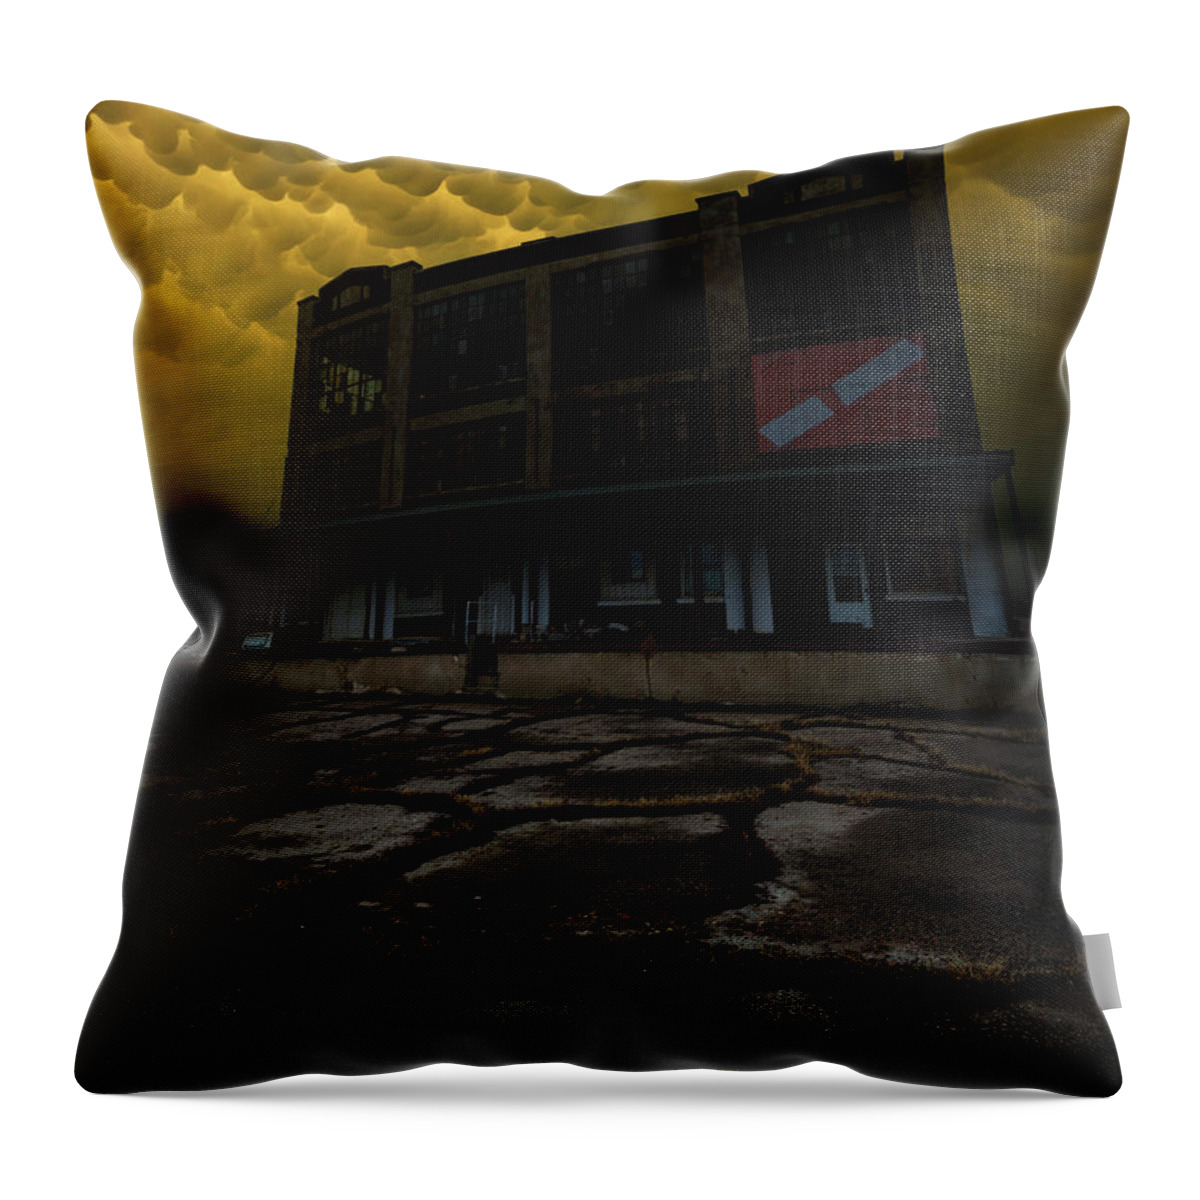 Mammatus Clouds Throw Pillow featuring the photograph The Day The World Went Away by Aaron J Groen